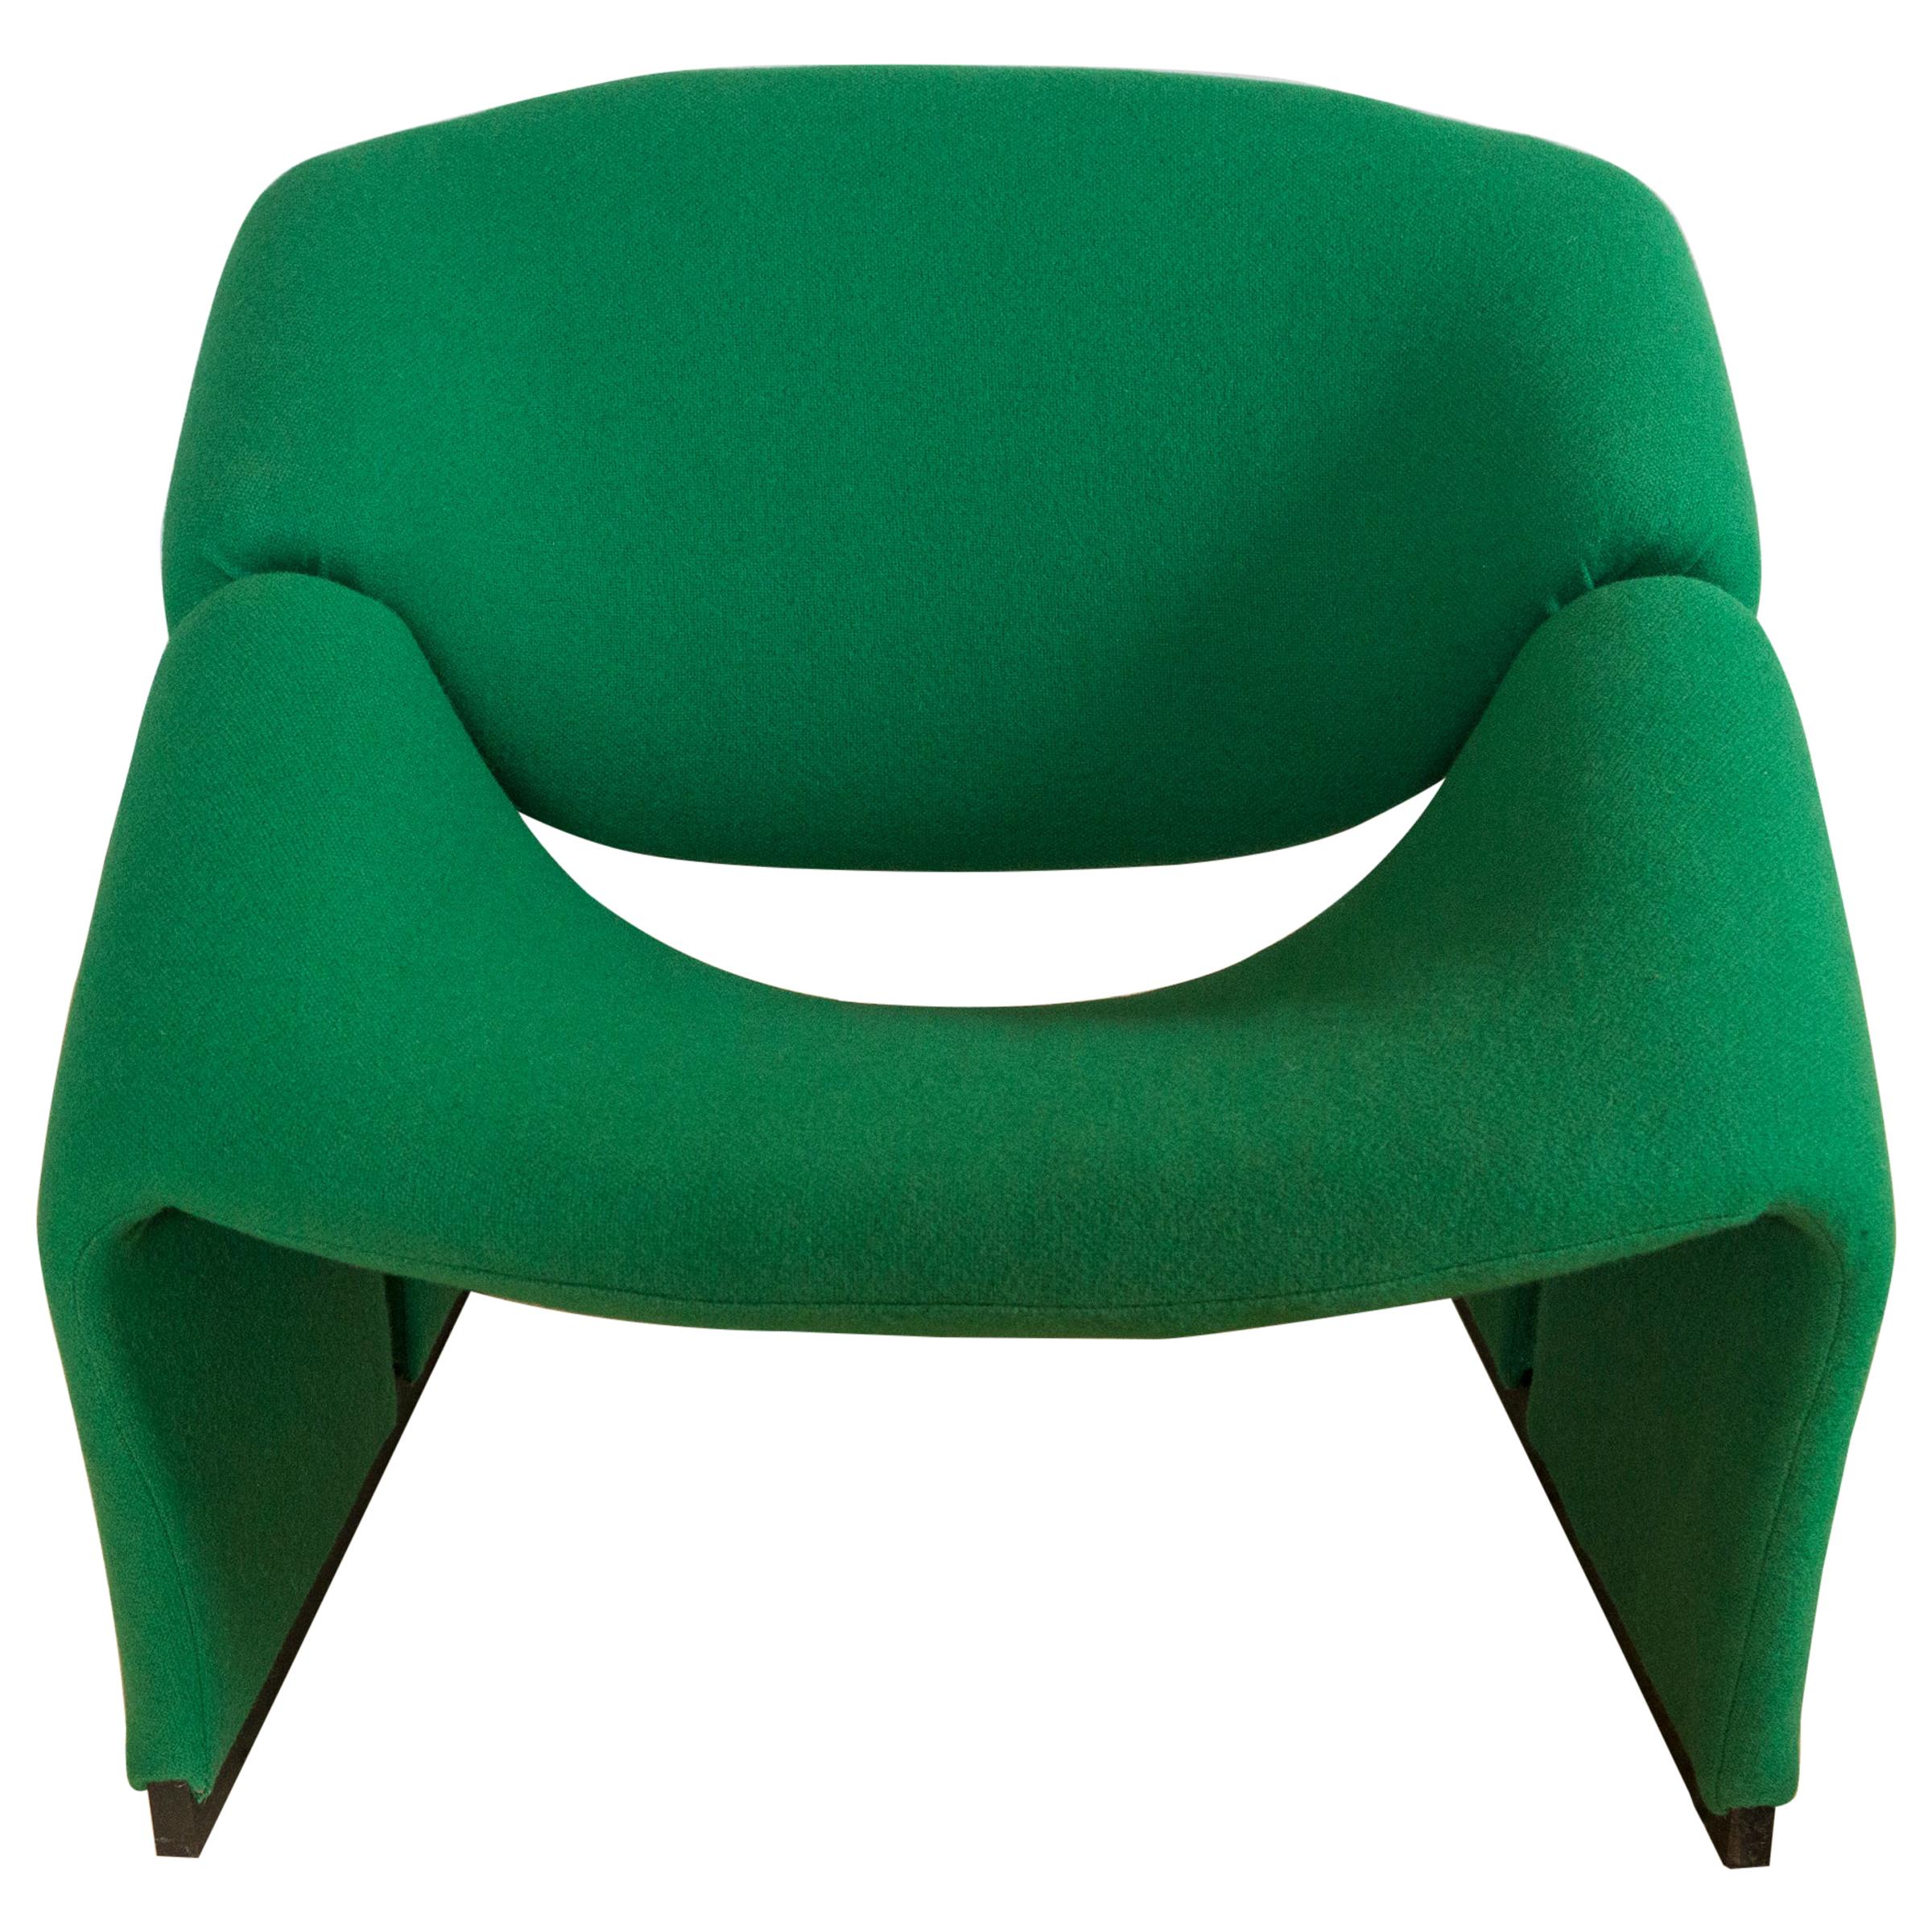 Pierre Paulin First Edition Green Groovy Chair F580 for Artifort